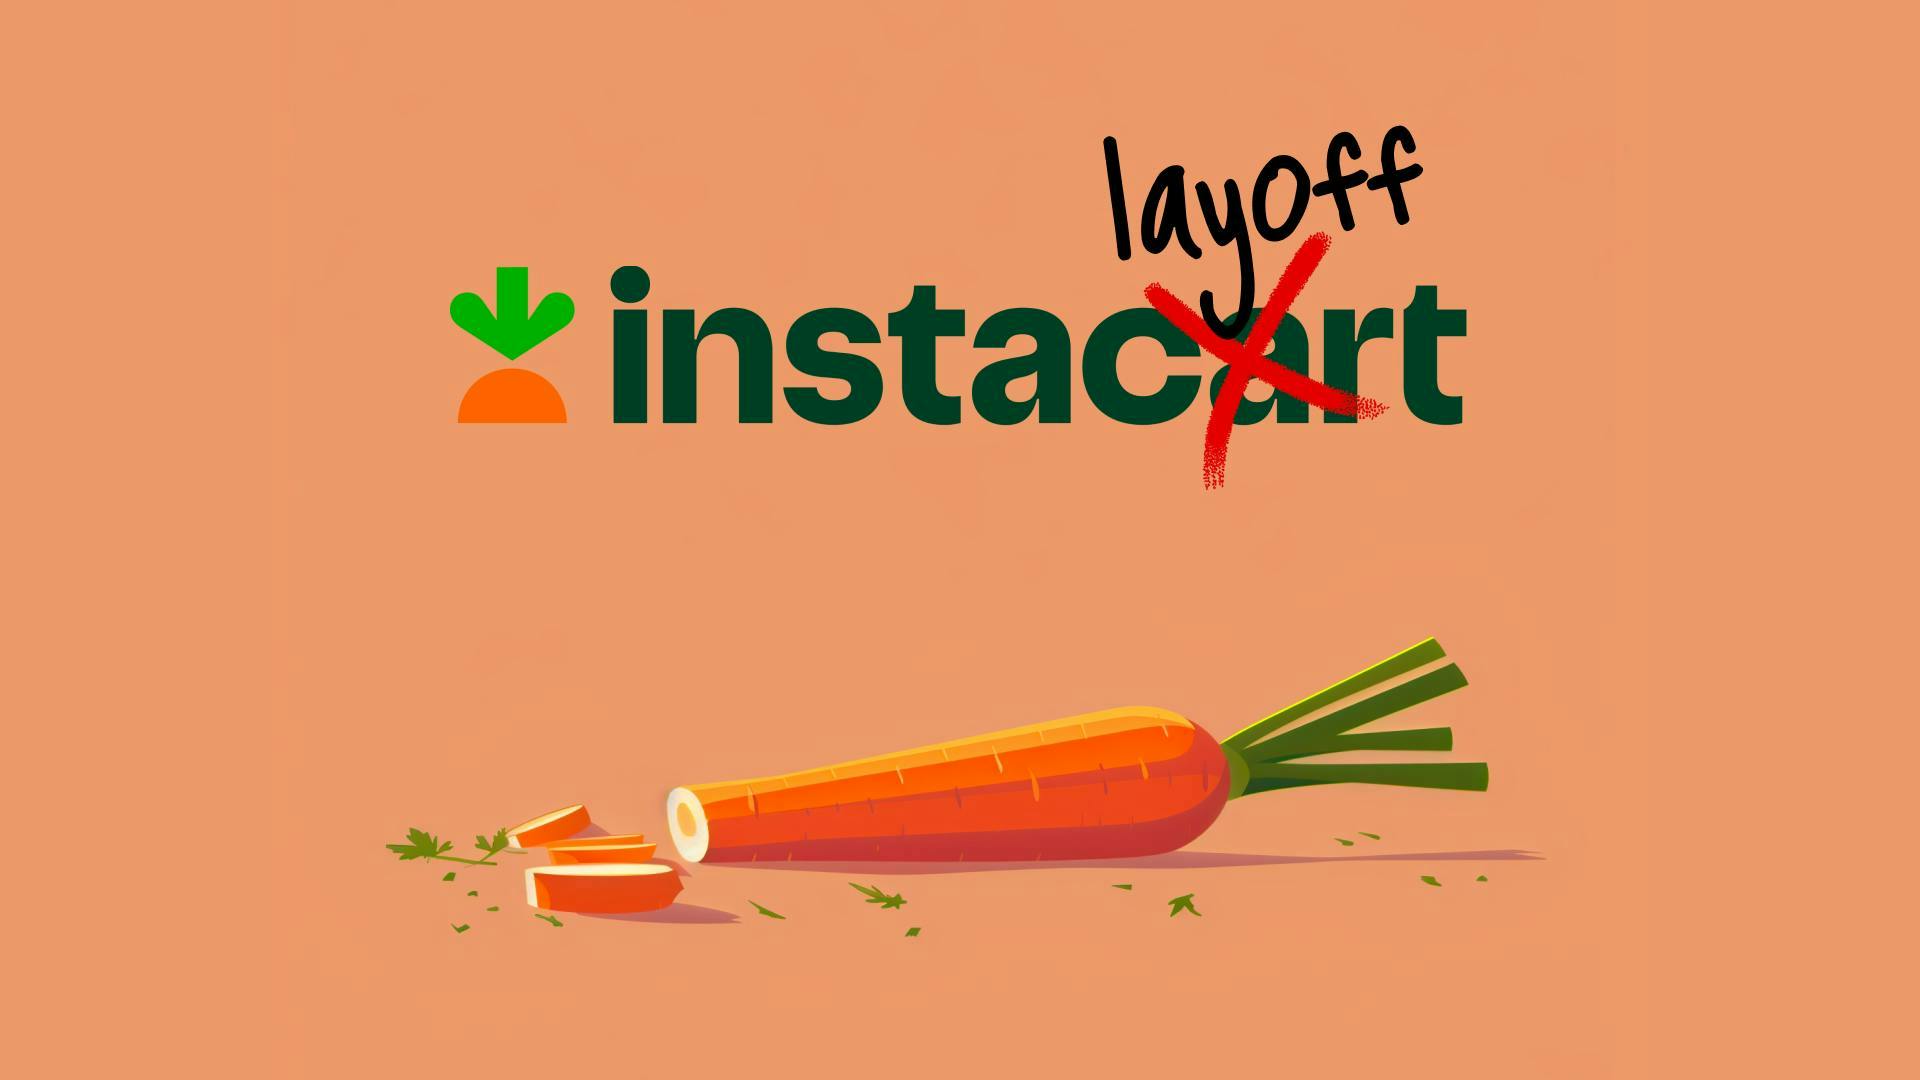 Instacart Announces Restructuring - 7% Workforce Layoff and Executive Departures